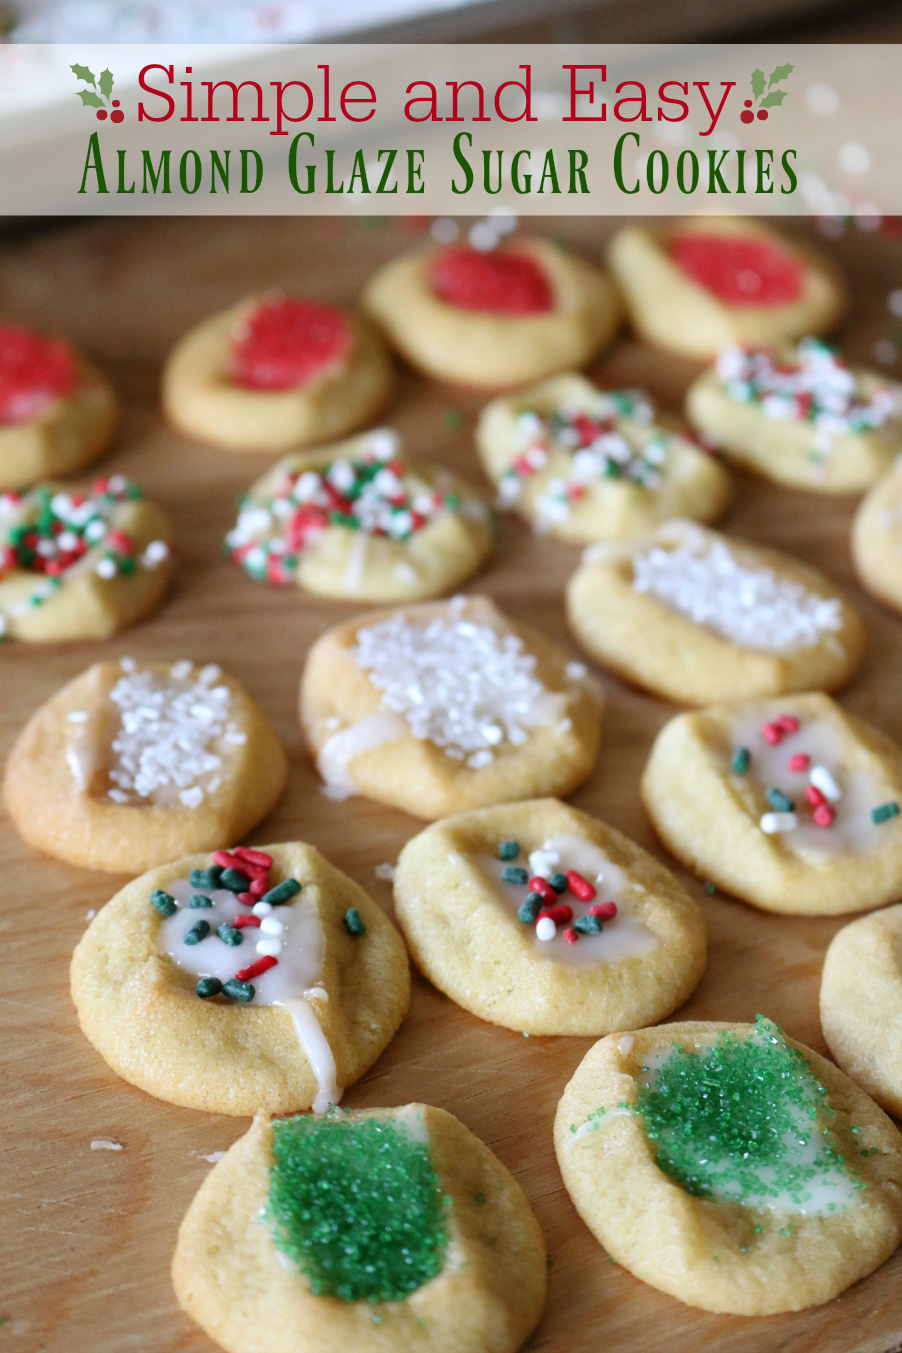 Cookie Emergency calls for Easy and Simple Almond Glaze Sugar Cookies with lots of sprinkles!